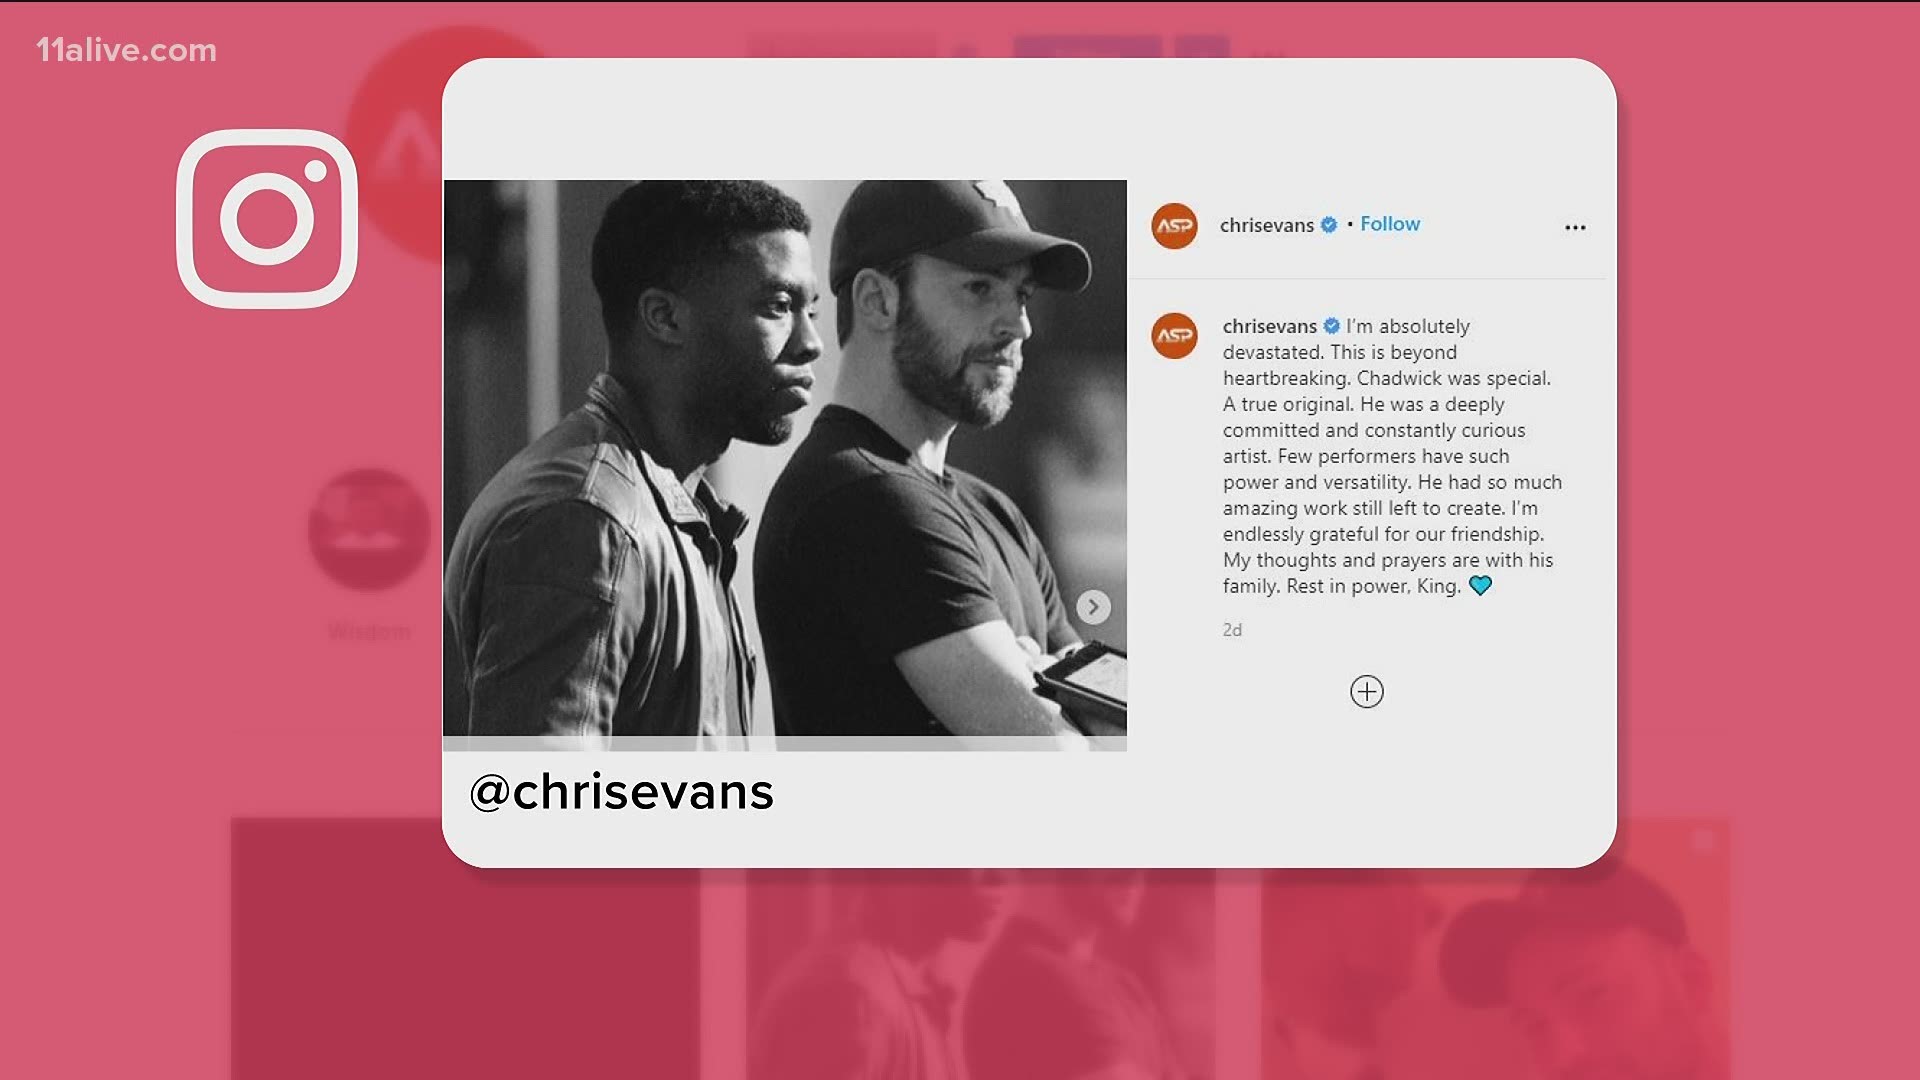 Actor Chadwick Boseman died after a private battle with cancer. His former cast members from Marvel films paid tribute to him.